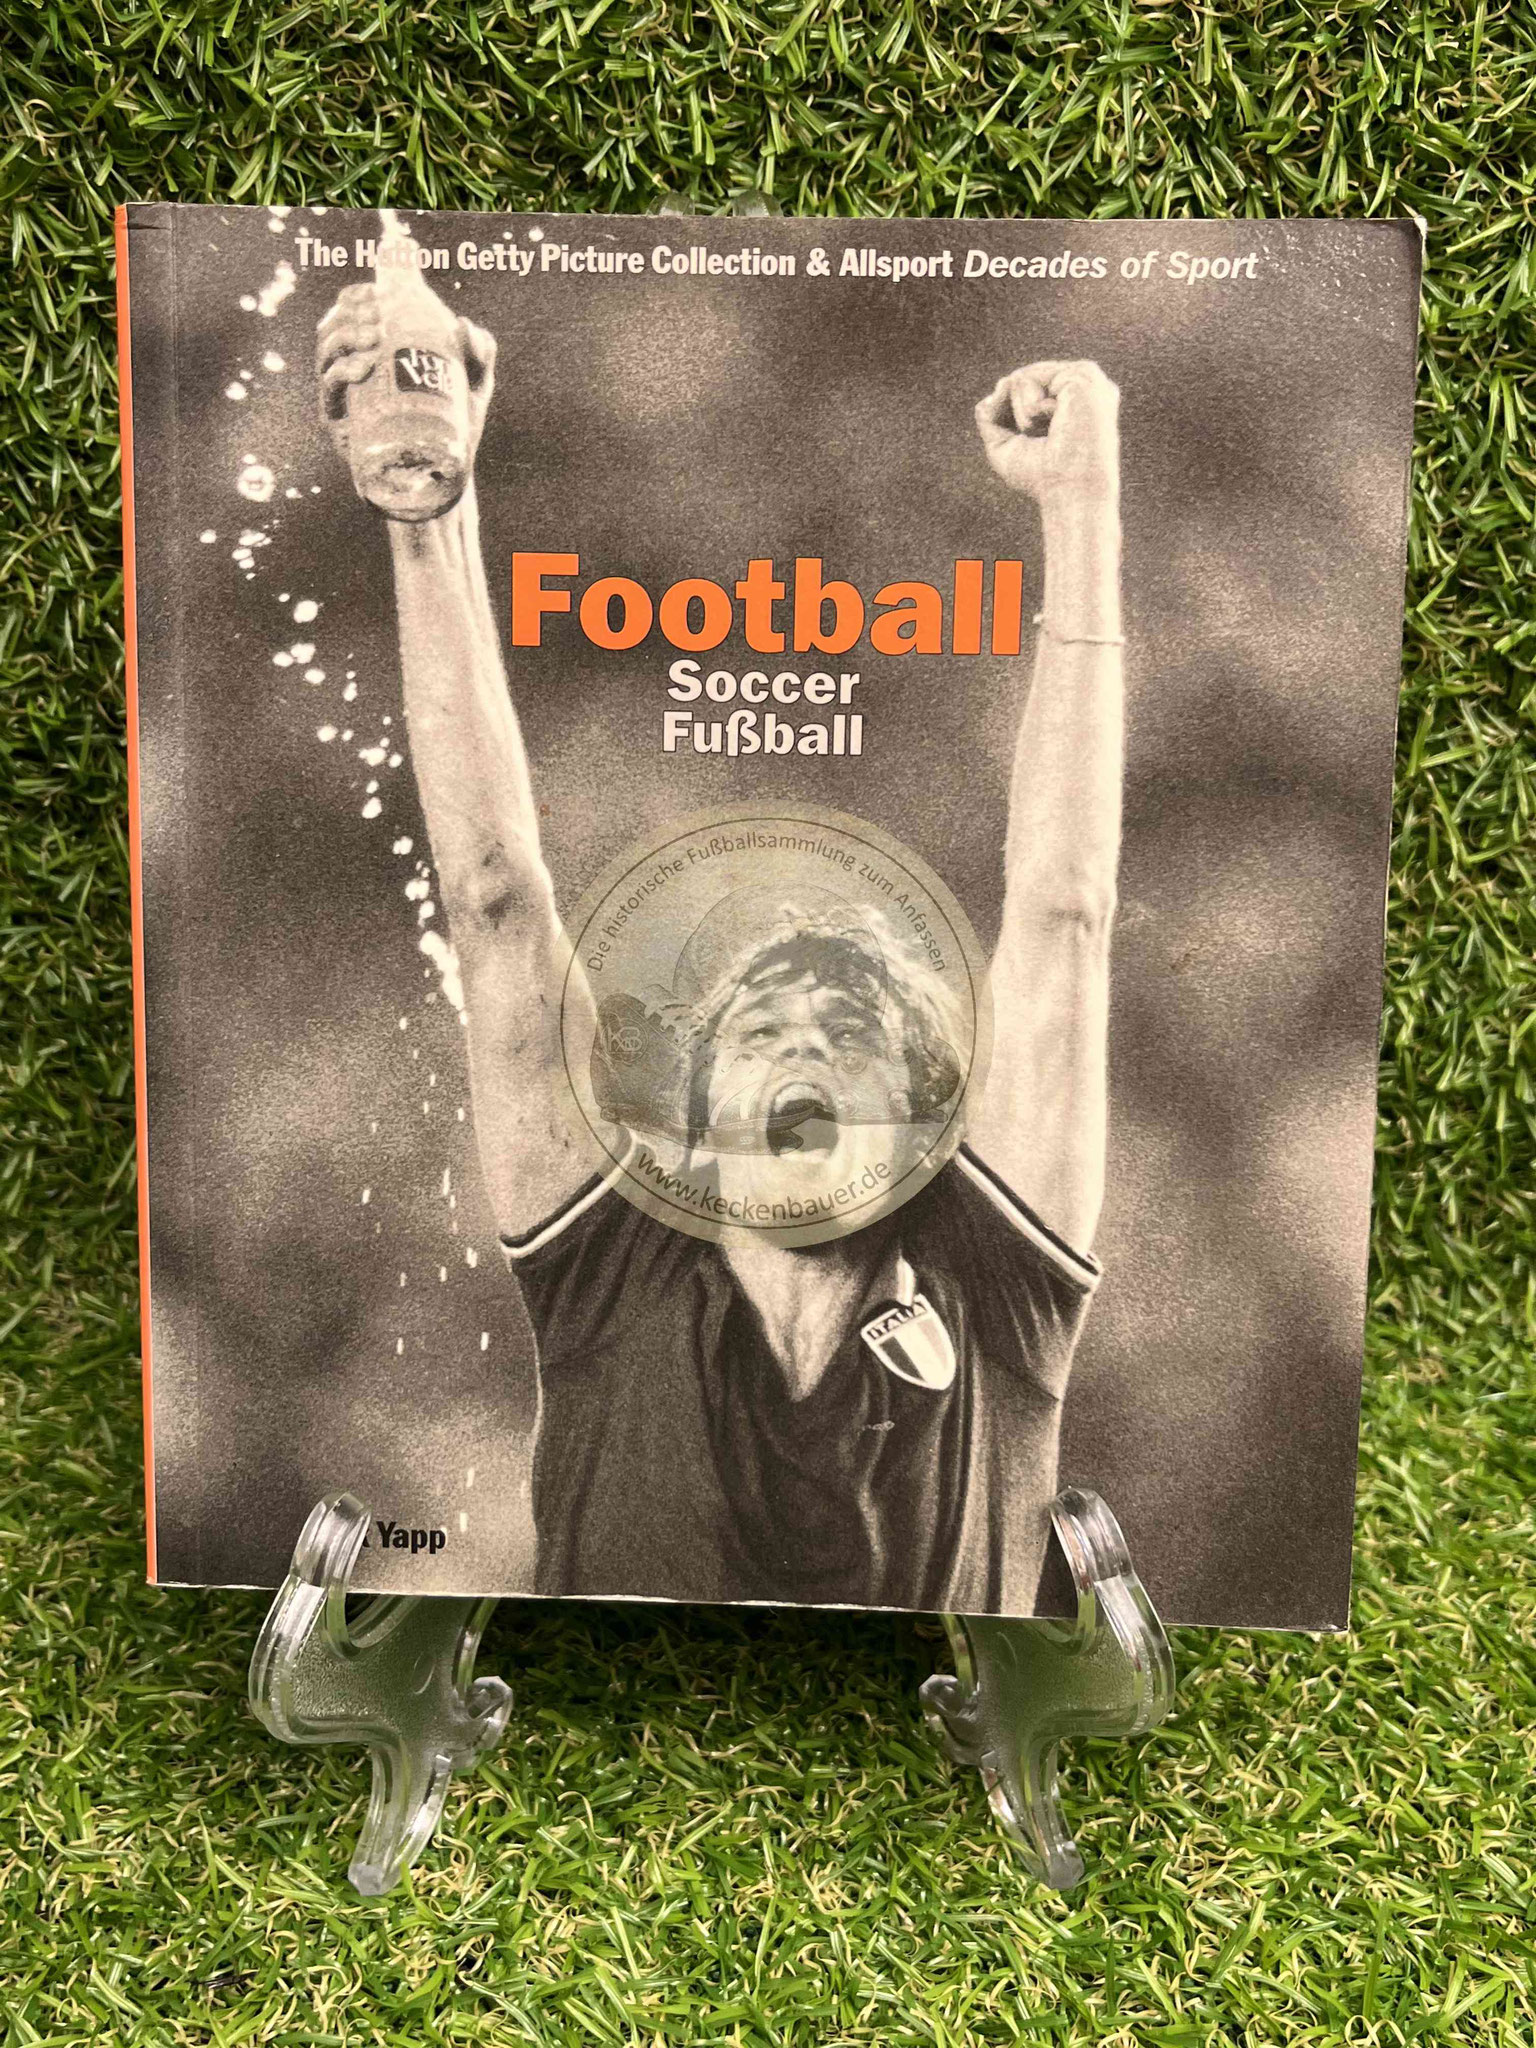 2000 The Hutton Getty Picture Collection 6 Allsportndecades of Sport Football Soccer Fußball